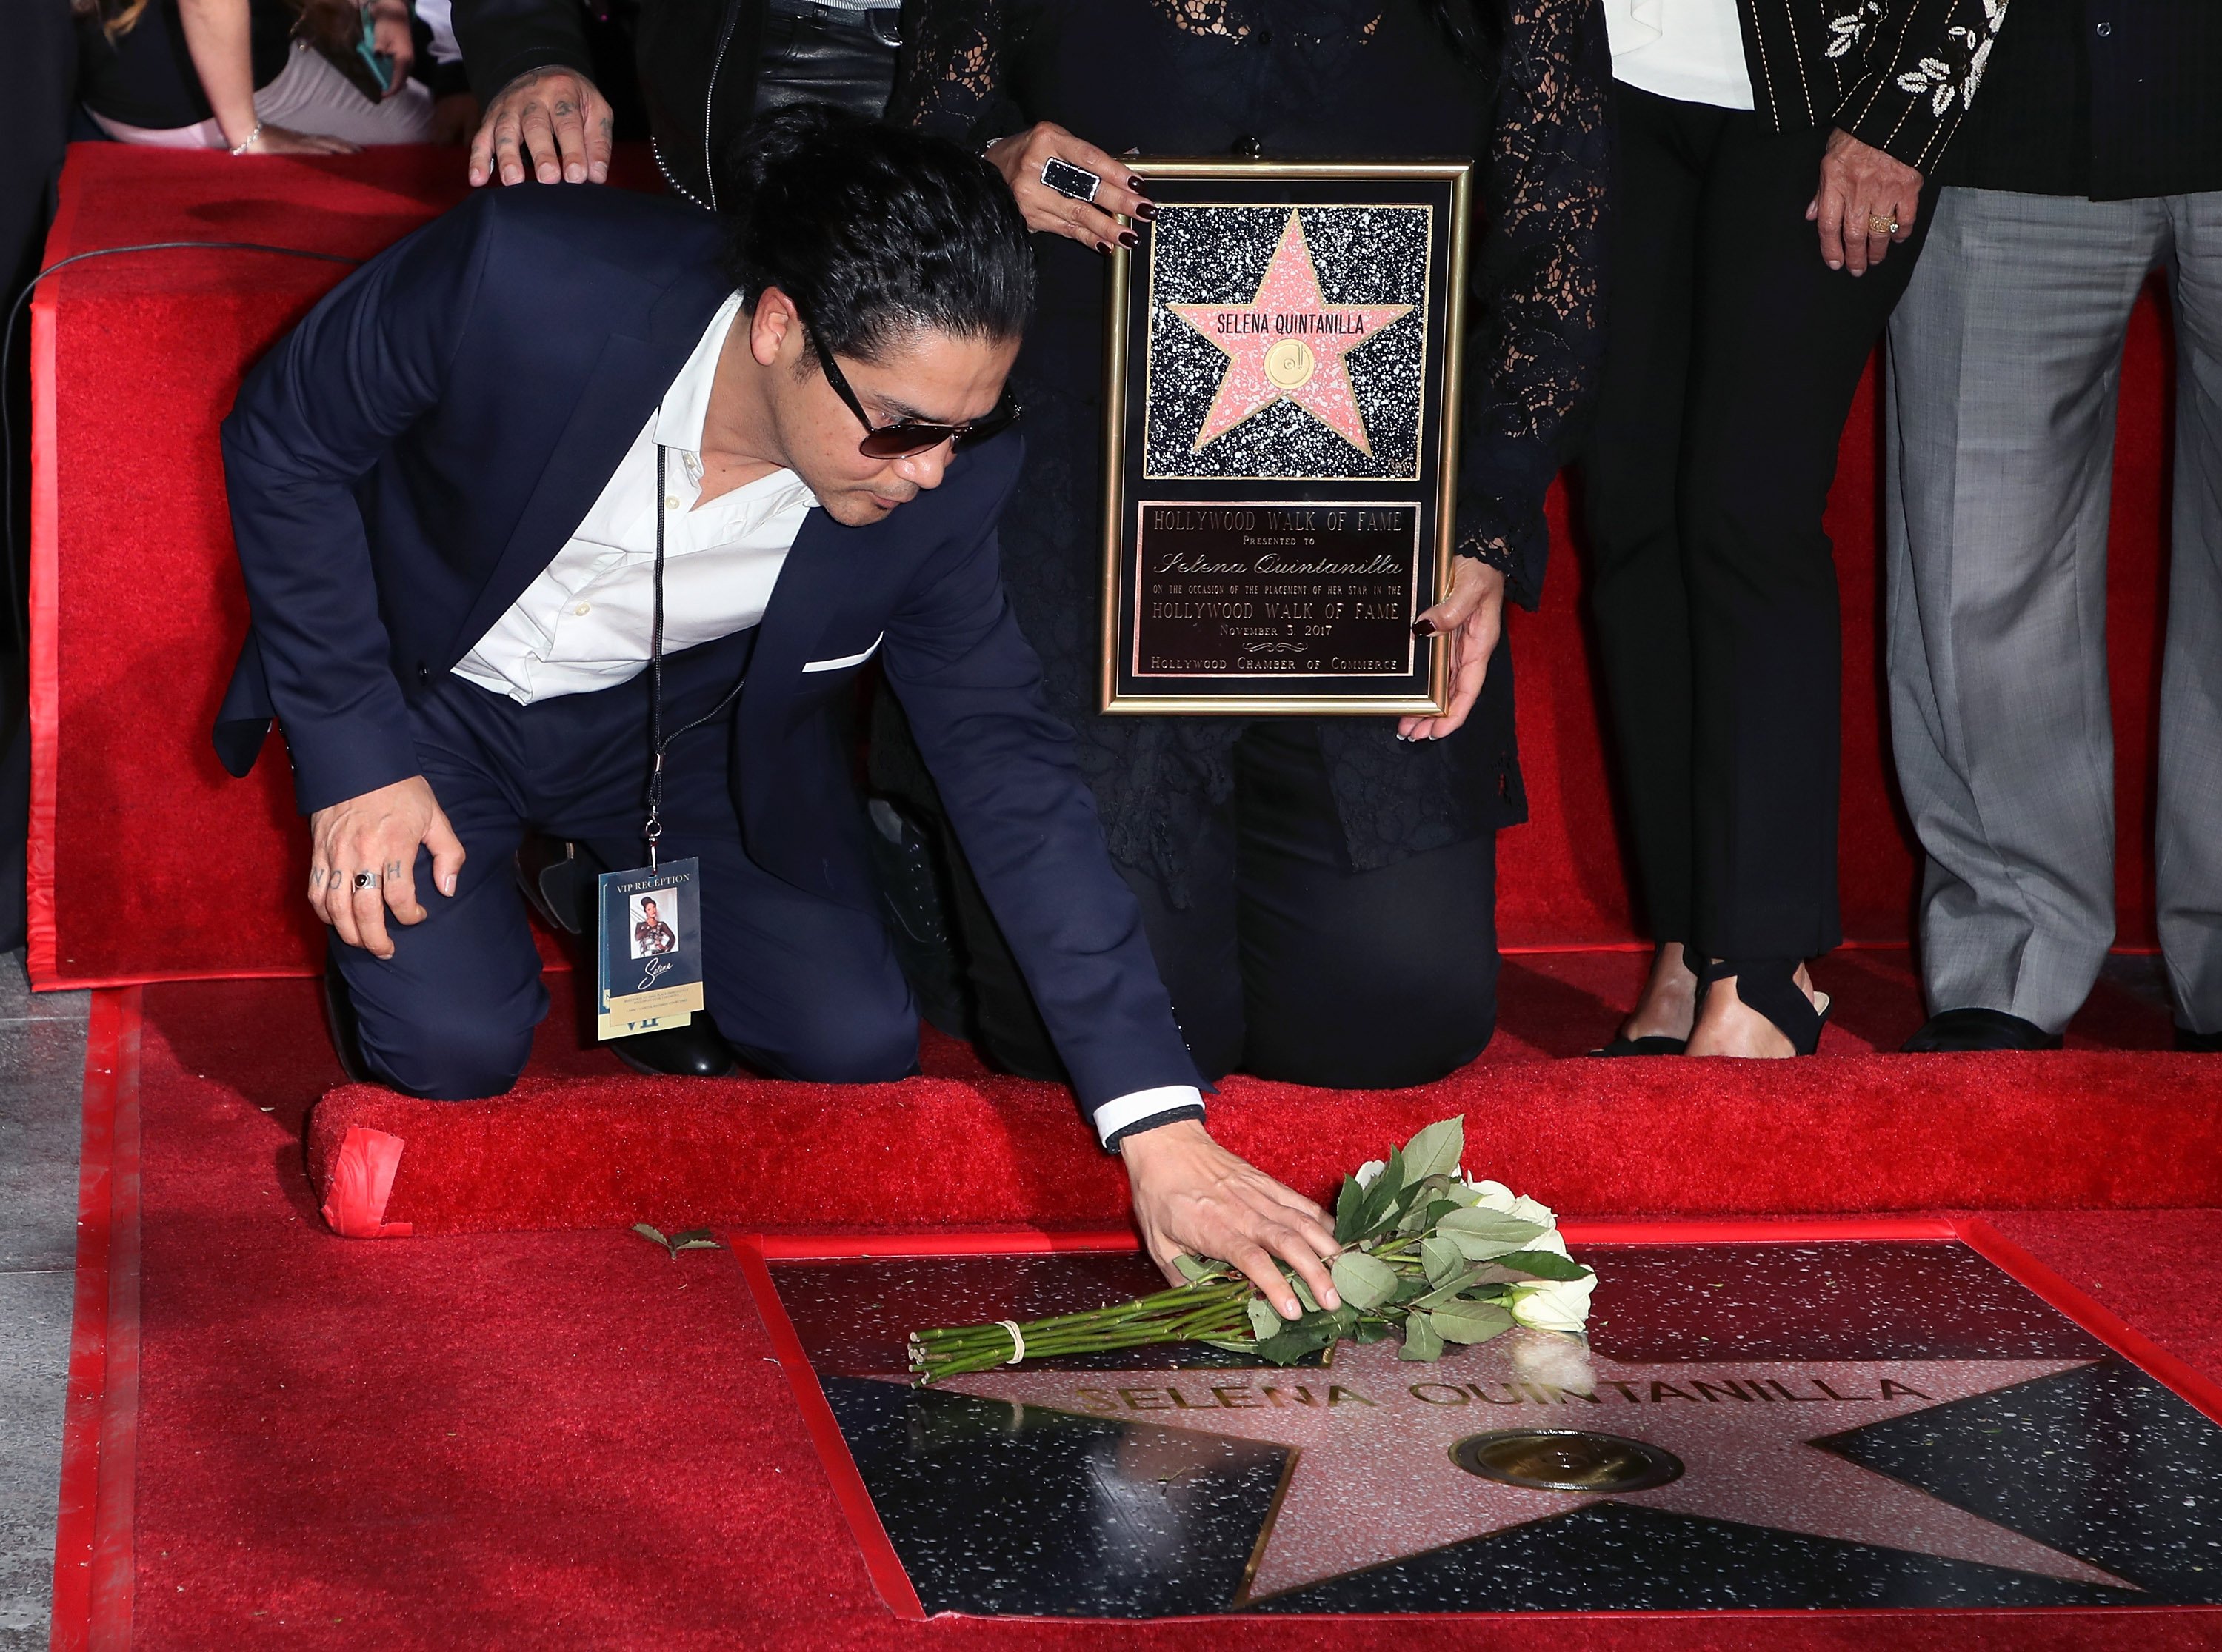 : Musician/Selena's widower Chris Perez attends singer Selena Quintanilla being honored posthumously with a Star on the Hollywood Walk of Fame on November 3, 2017 in Hollywood, California.